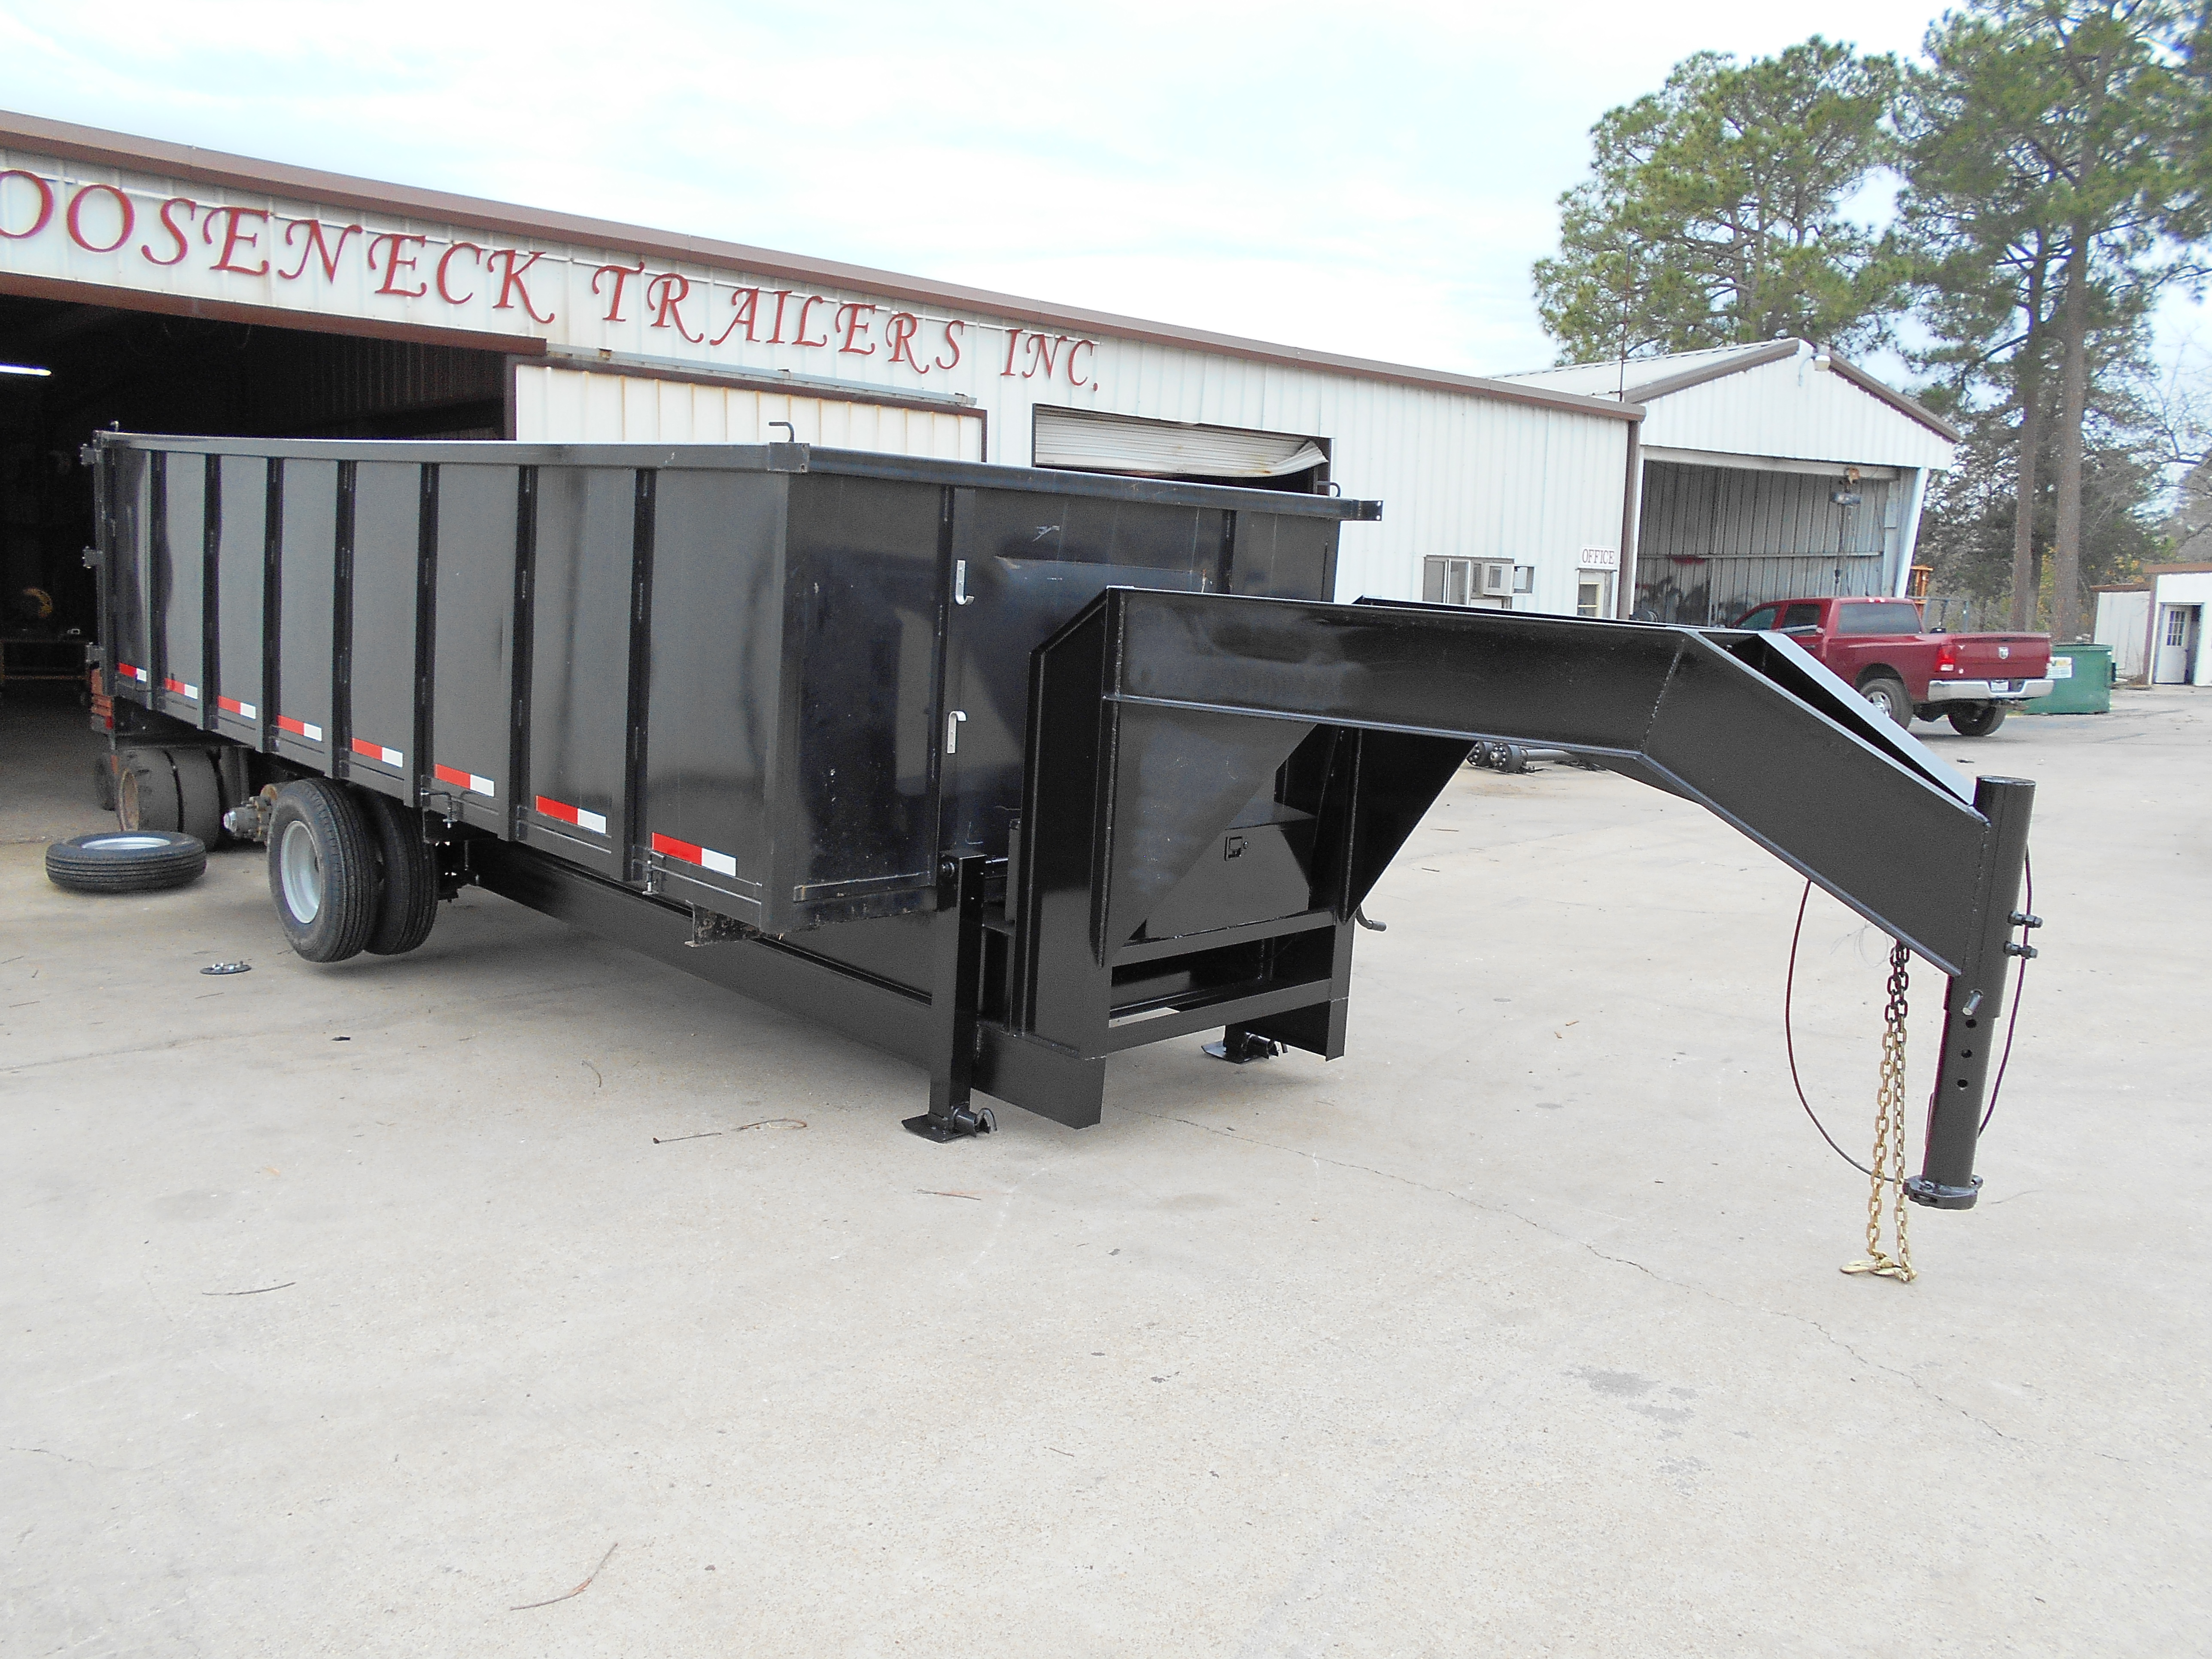 tadam hot shot trailers for sale in oklahomna